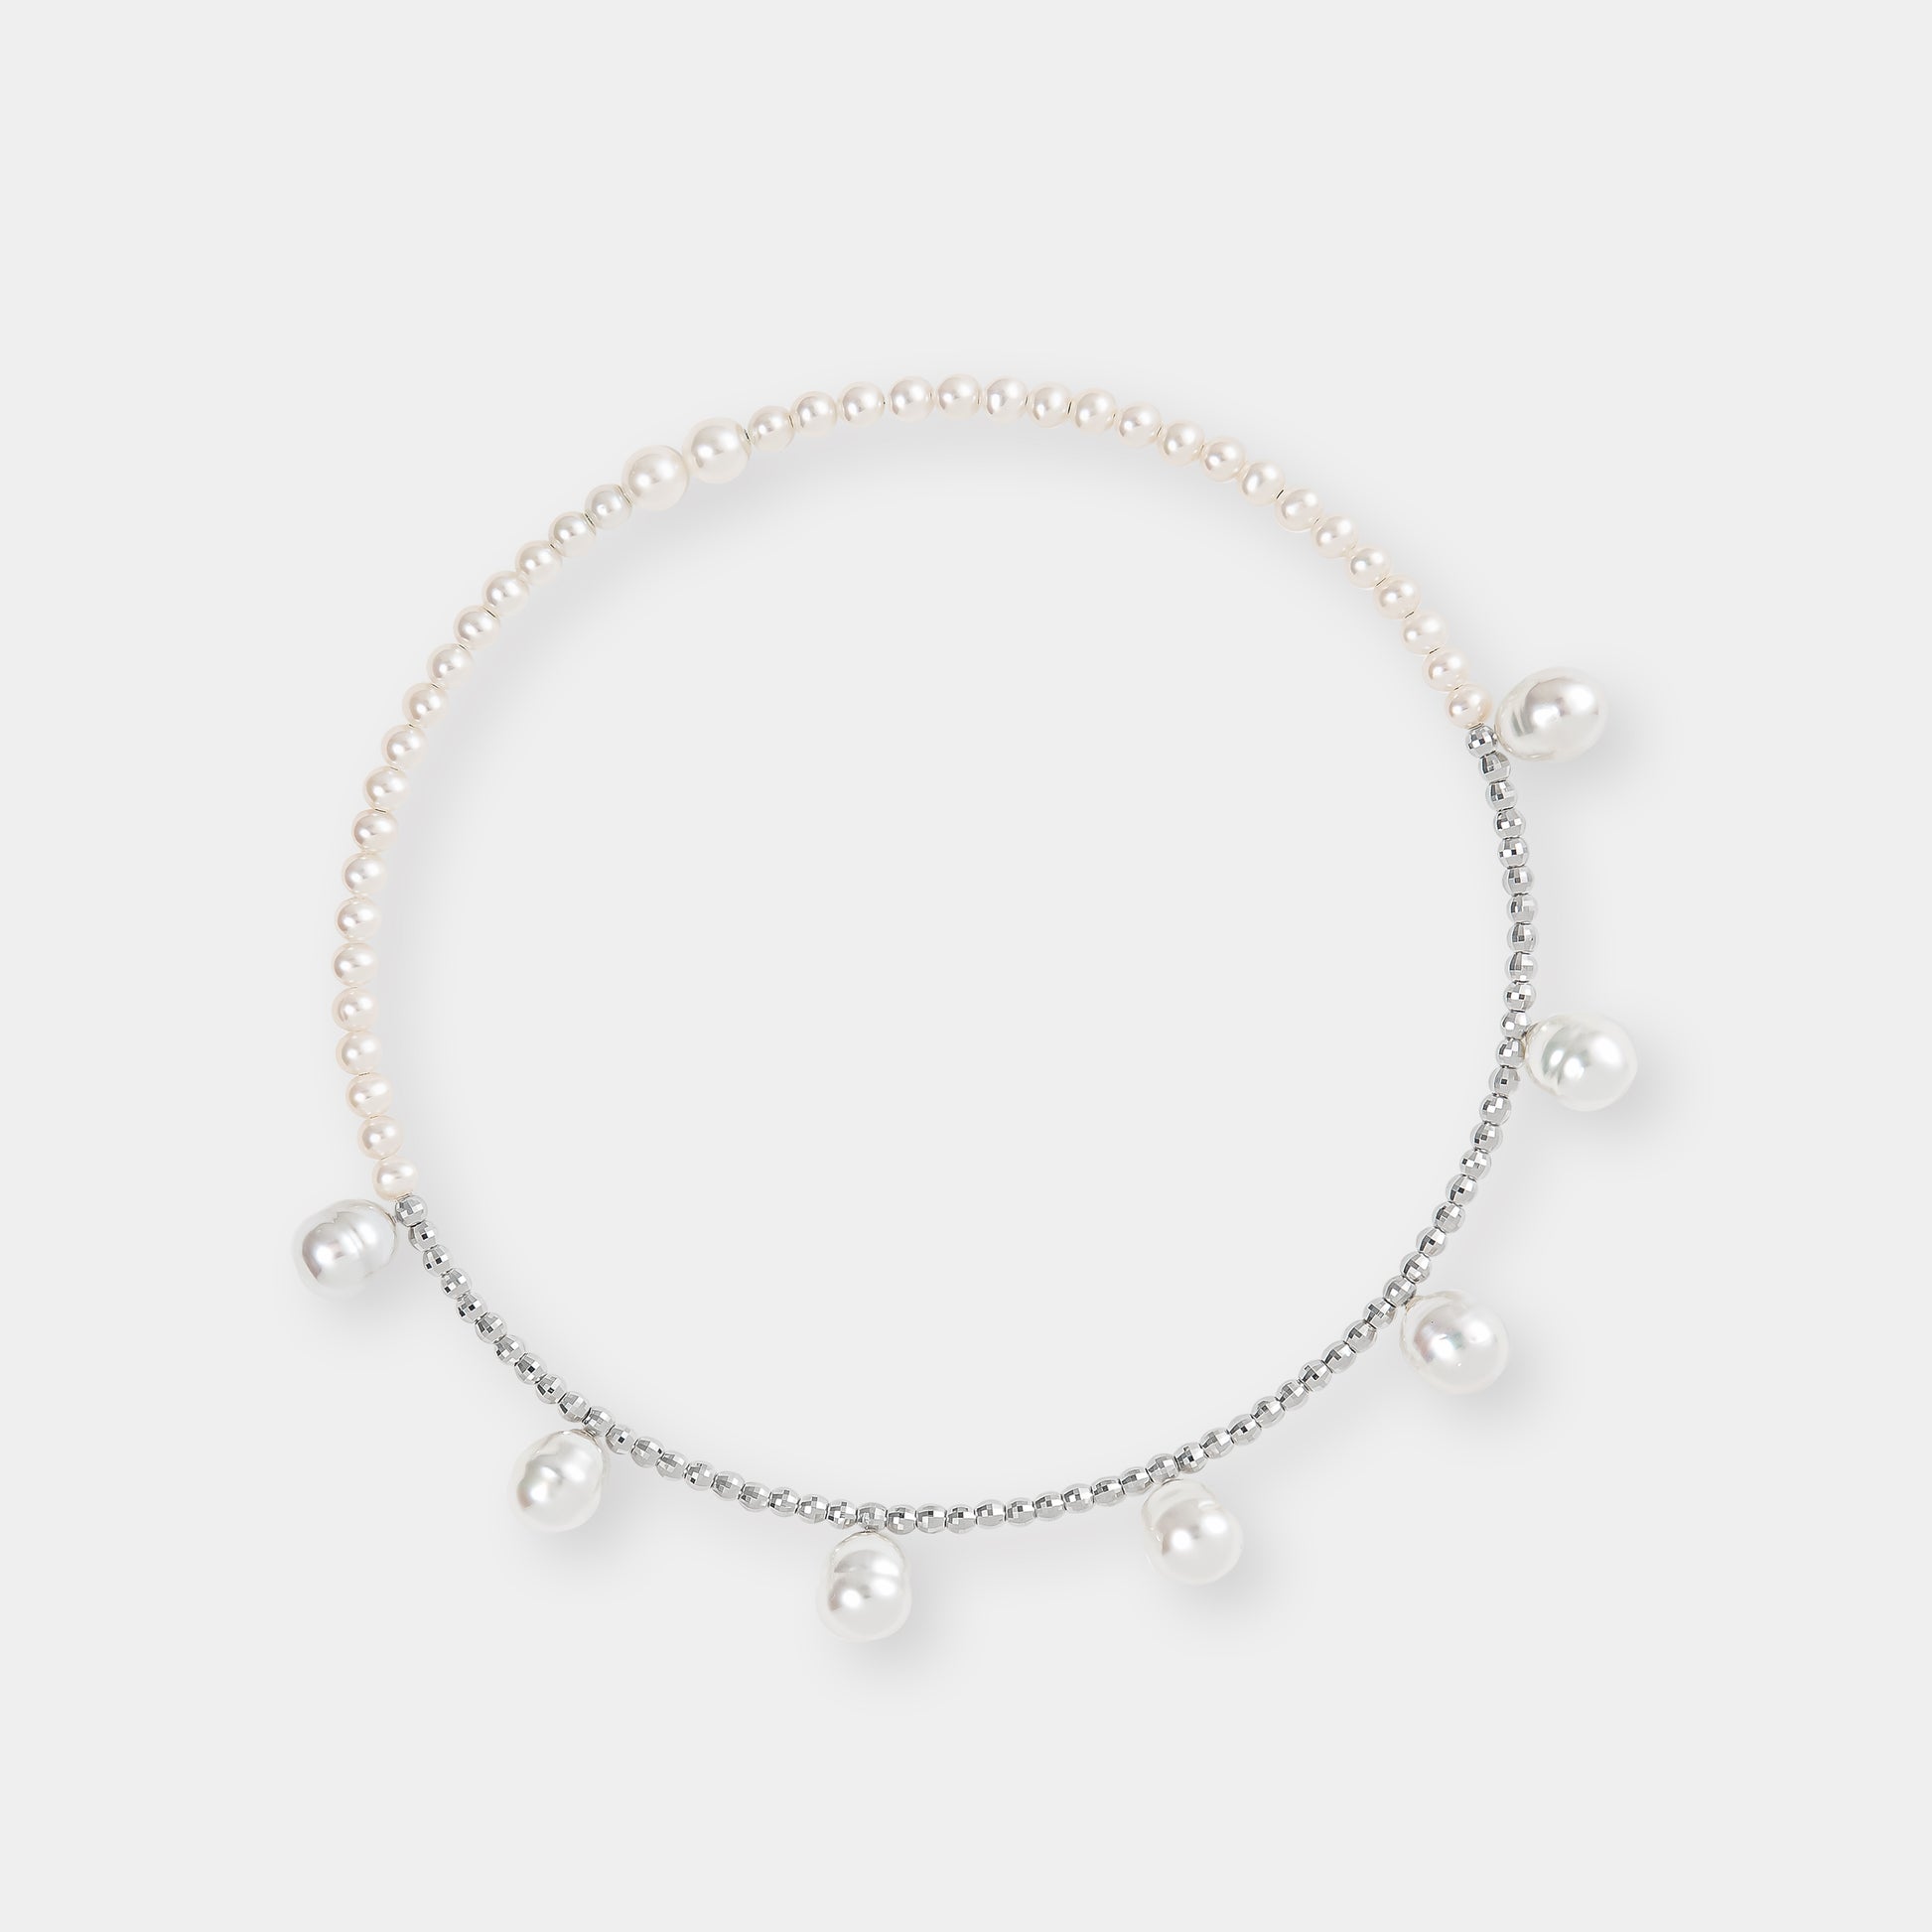 Luxurious pearl and white gold beads against a clean white backdrop, a stunning accessory for any occasion.